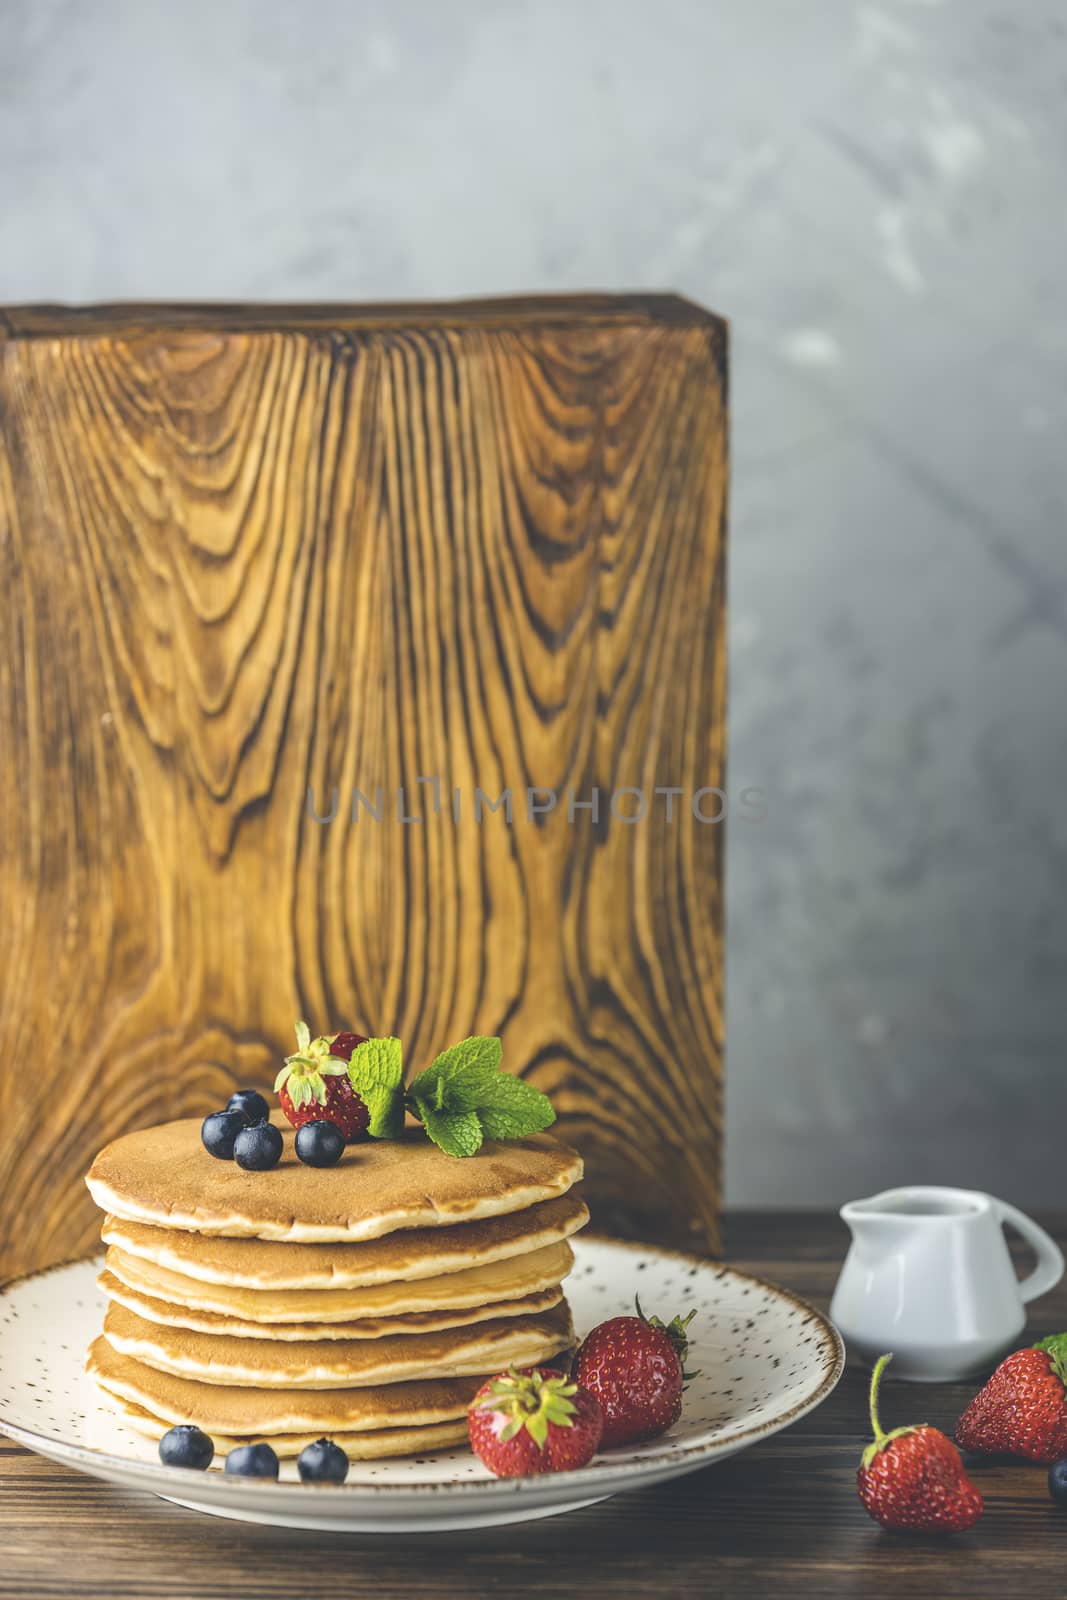 Pancake with srtawberry, blueberry and mint in ceramic dish, syr by ArtSvitlyna